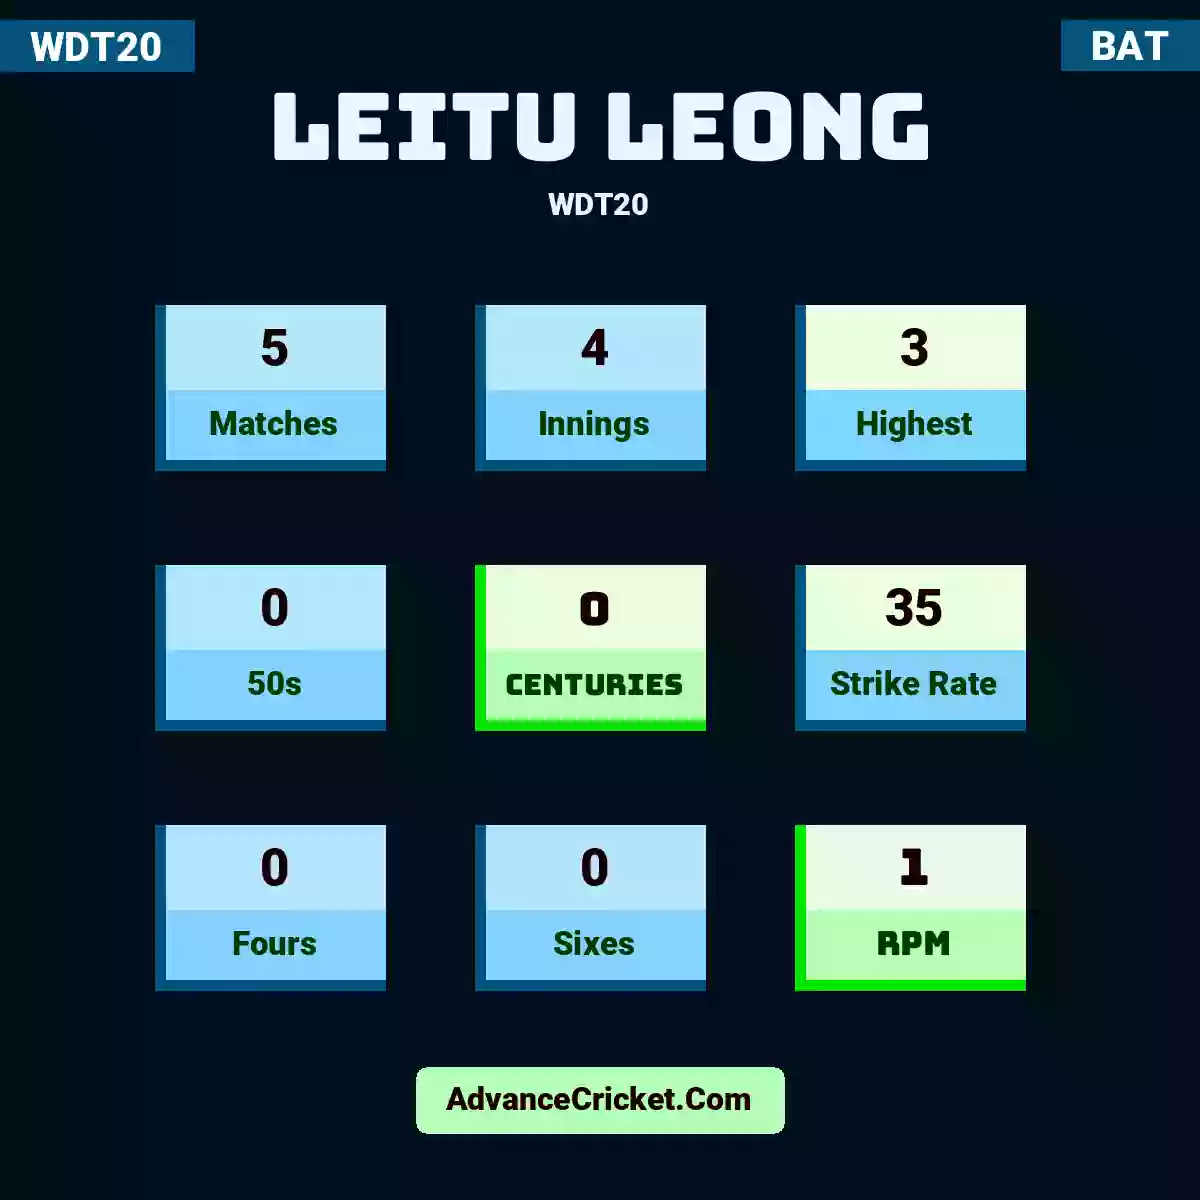 Leitu Leong WDT20 , Leitu Leong played 5 matches, scored 3 runs as highest, 0 half-centuries, and 0 centuries, with a strike rate of 35. L.Leong hit 0 fours and 0 sixes, with an RPM of 1.